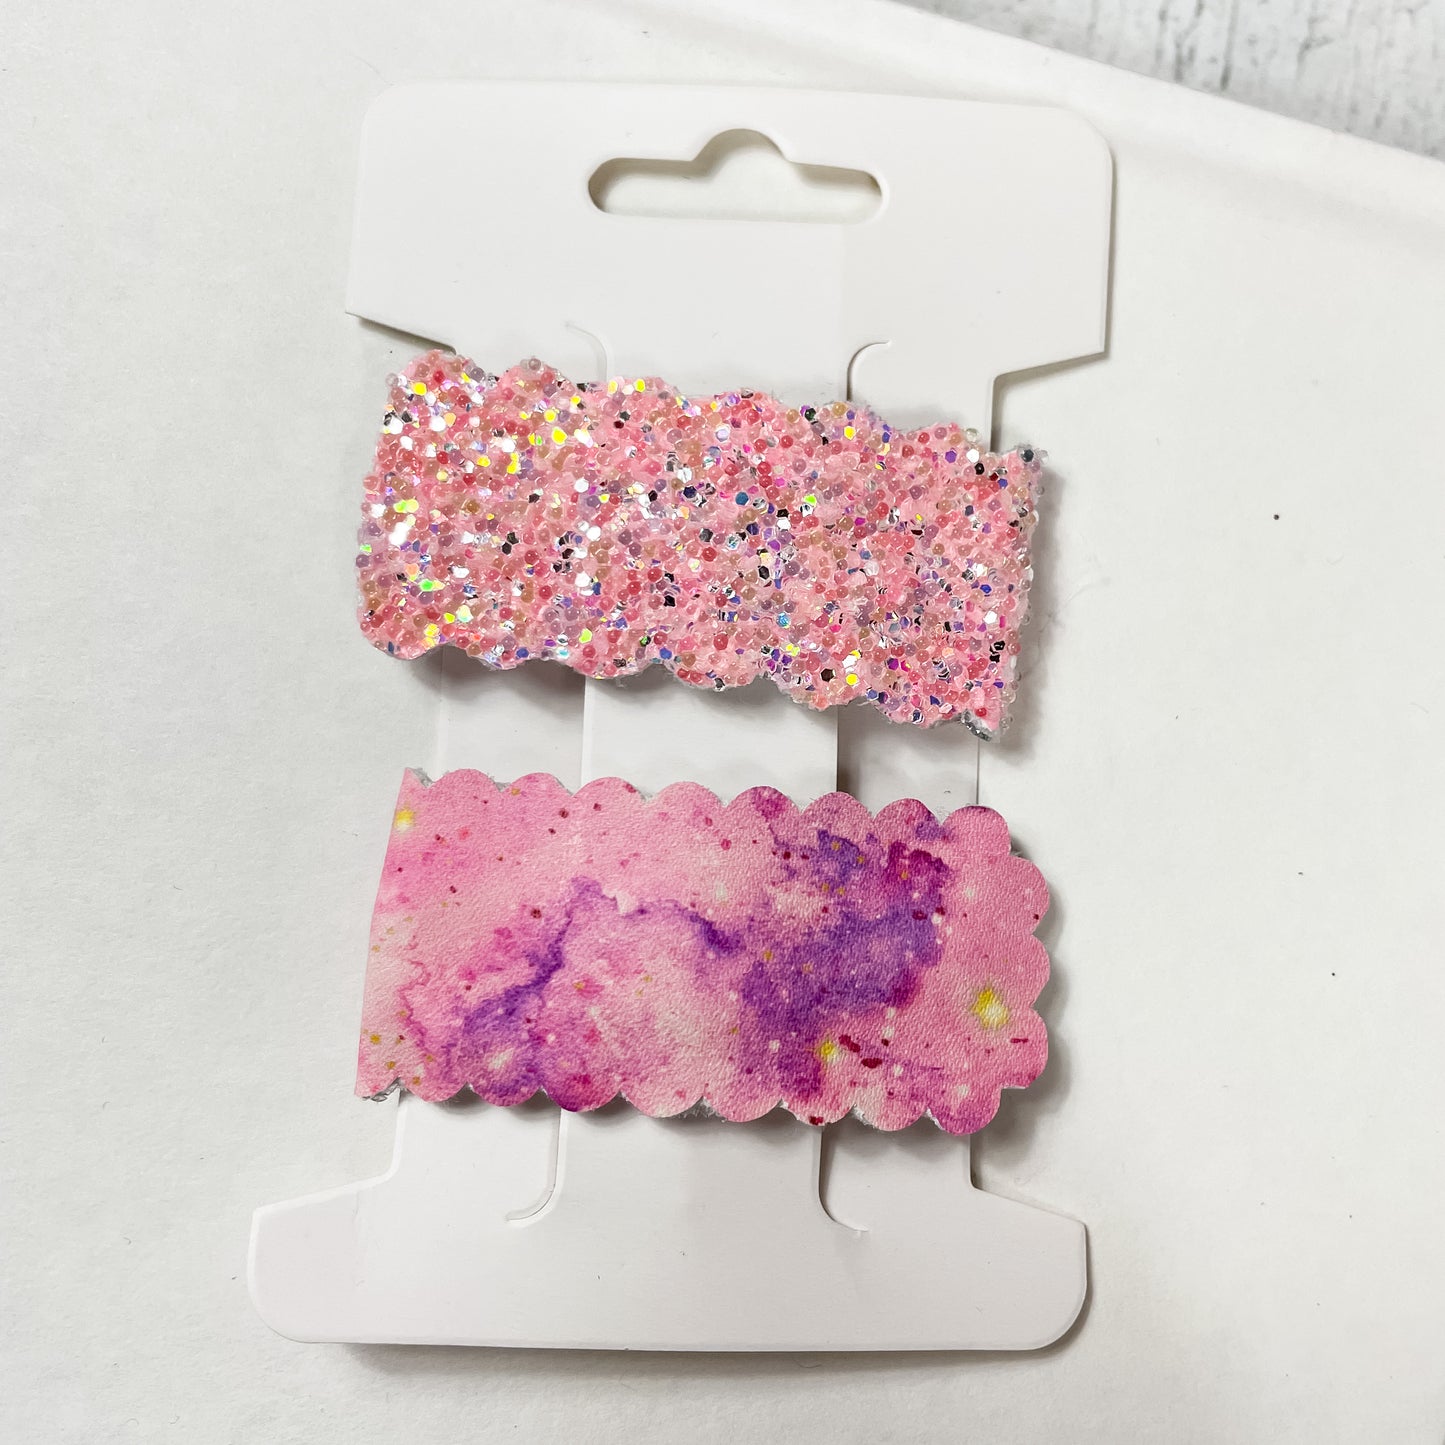 Scalloped Pink Glitter and Pink & Purple Galaxy Hair Clip Snap Clip Sets | Handmade Hair Accessories